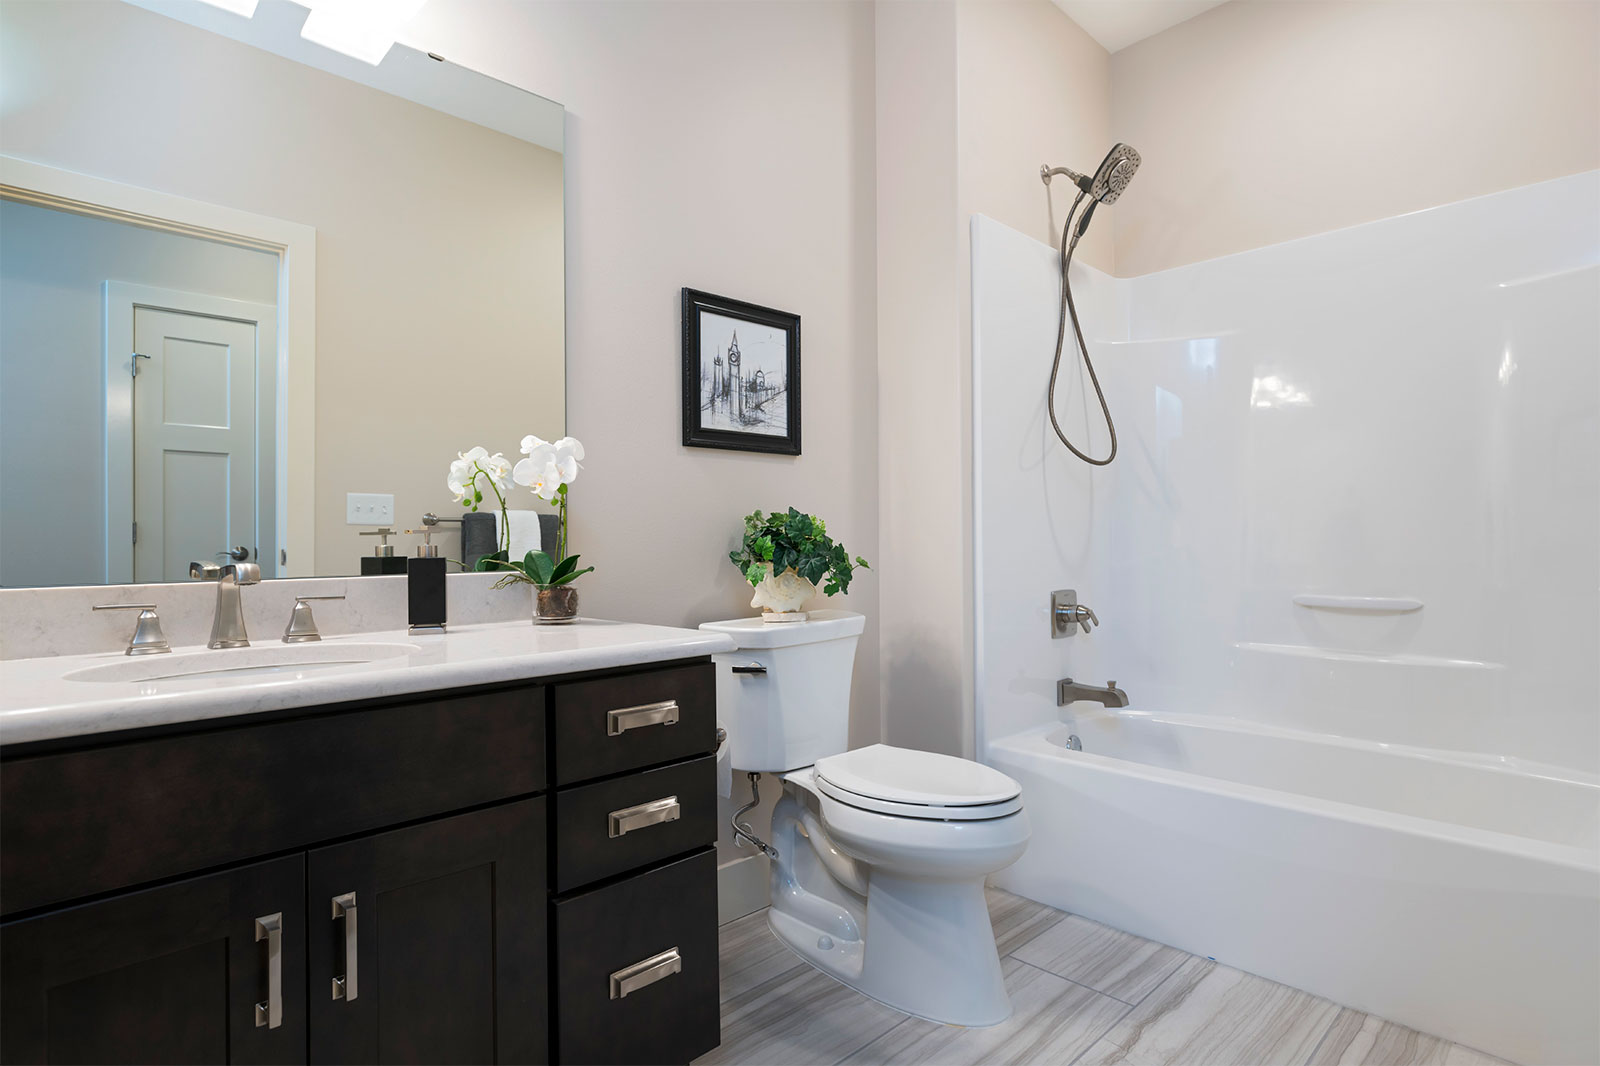 A luxury bathroom photo taken at the Villas at Blystone in Monclova, Ohio, constructed by the team at Miller Diversified